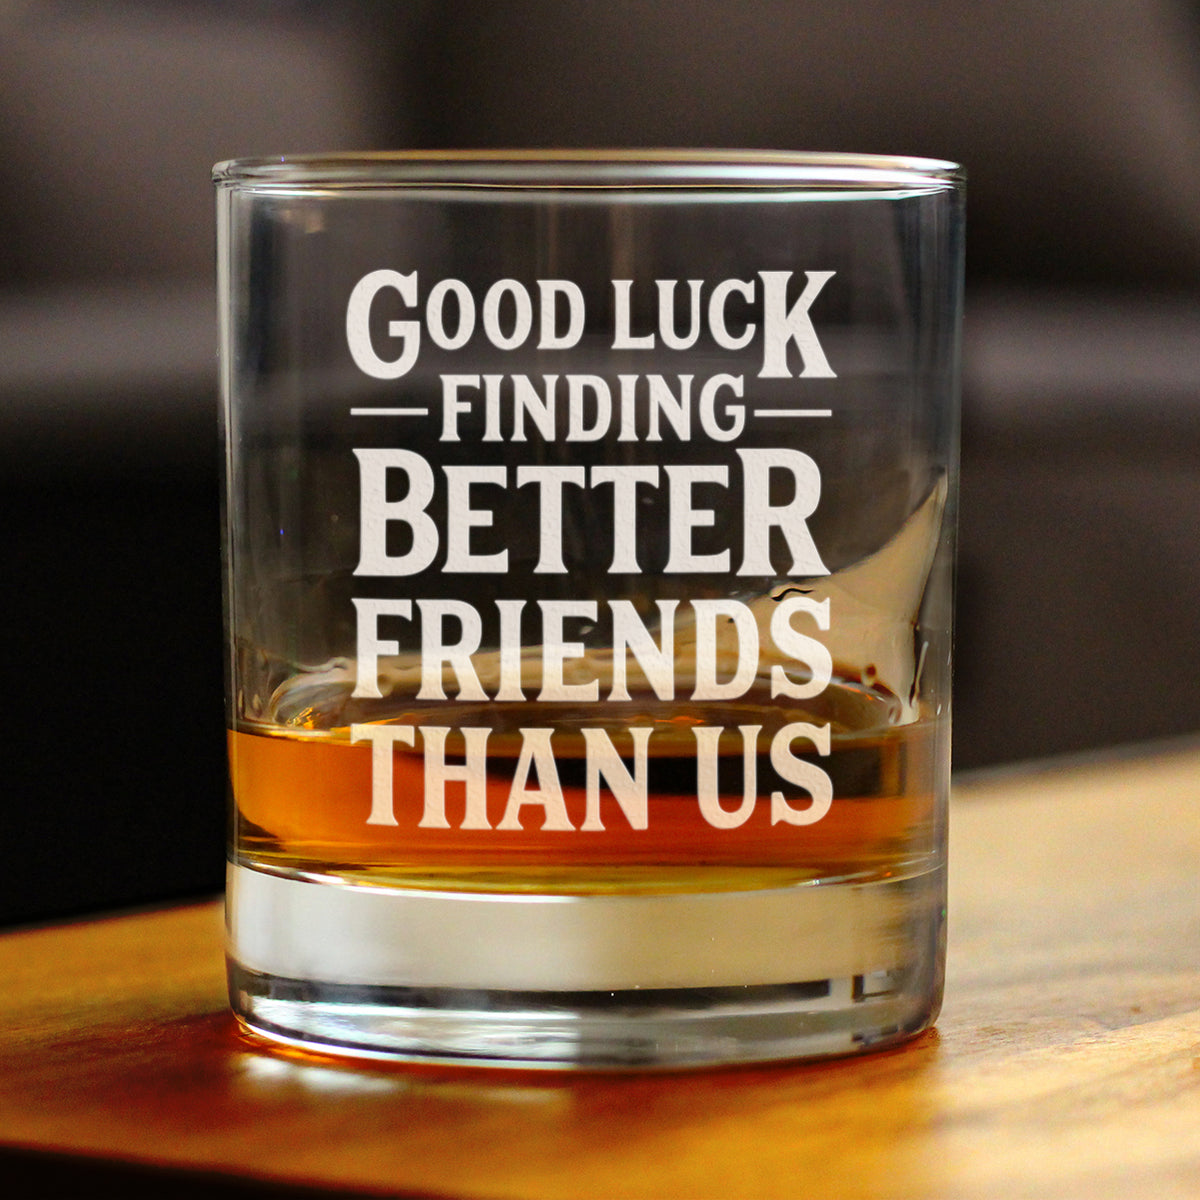 Good Luck Finding Better Friends Than Us - Whiskey Rocks Glass - Funny Farewell Gift For Best Friend Moving Away - 10.25 Oz Glasses